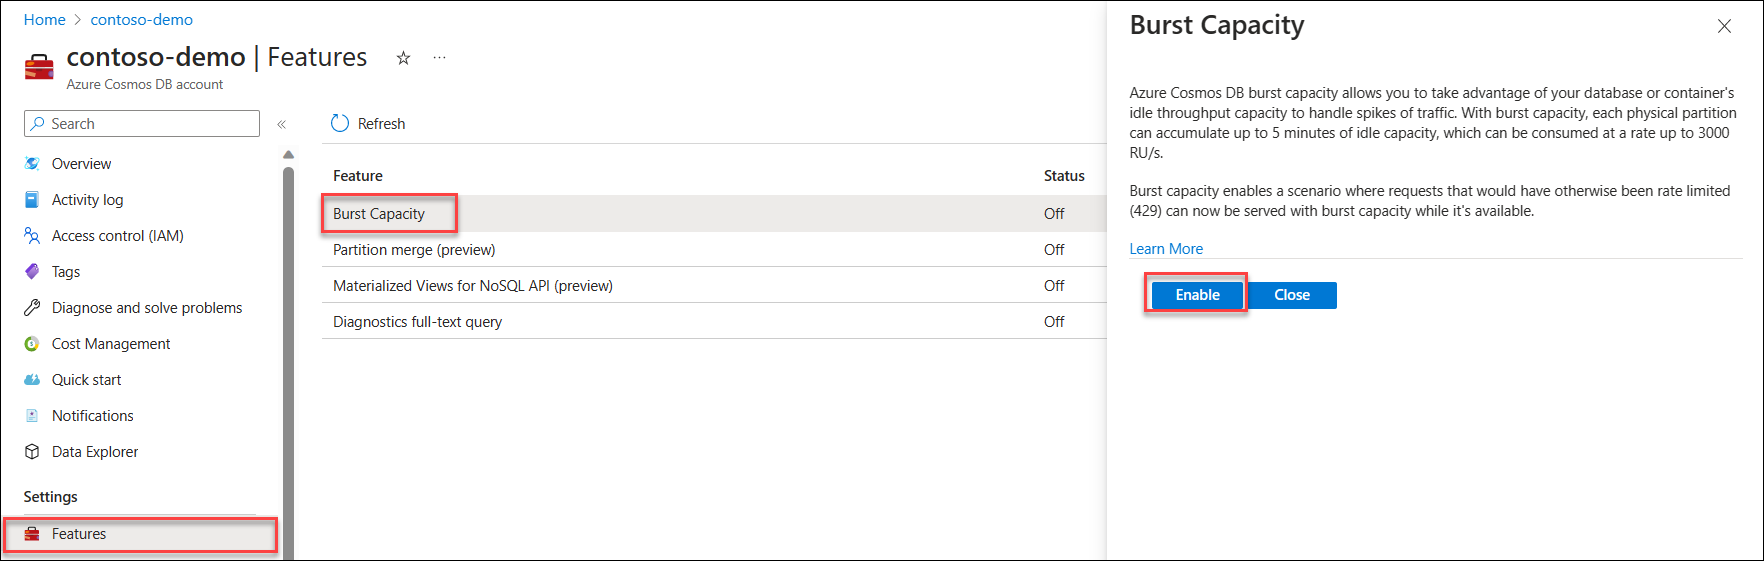 Screenshot of Burst Capacity feature in the Features page in an Azure Cosmos DB account.